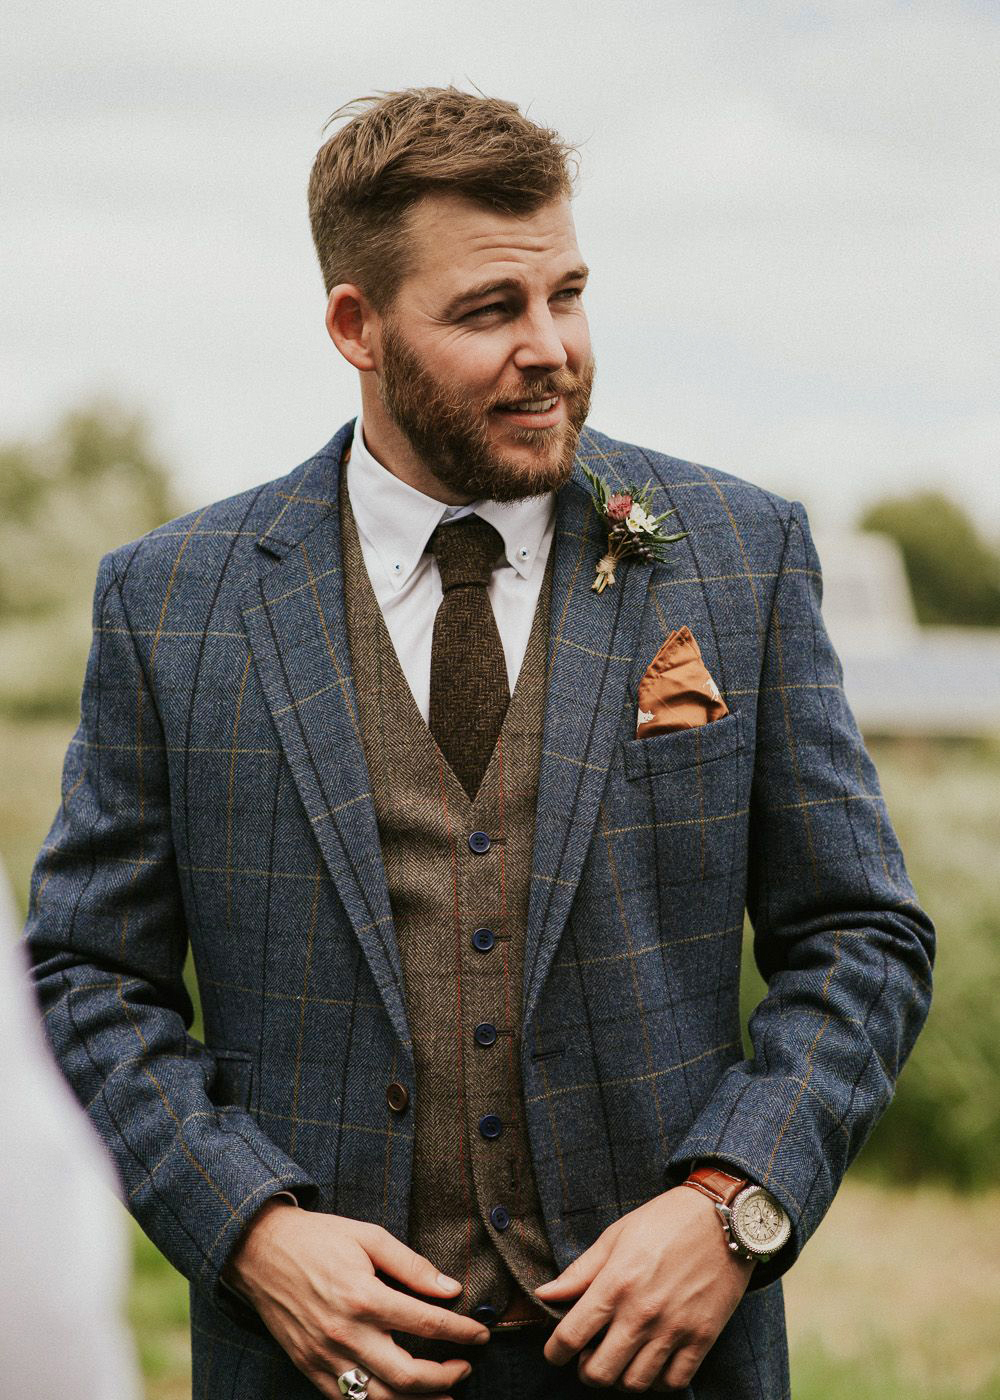 informal winter wedding outfit: grey plaid suit jacket and brown tweed vest with brown knit tie